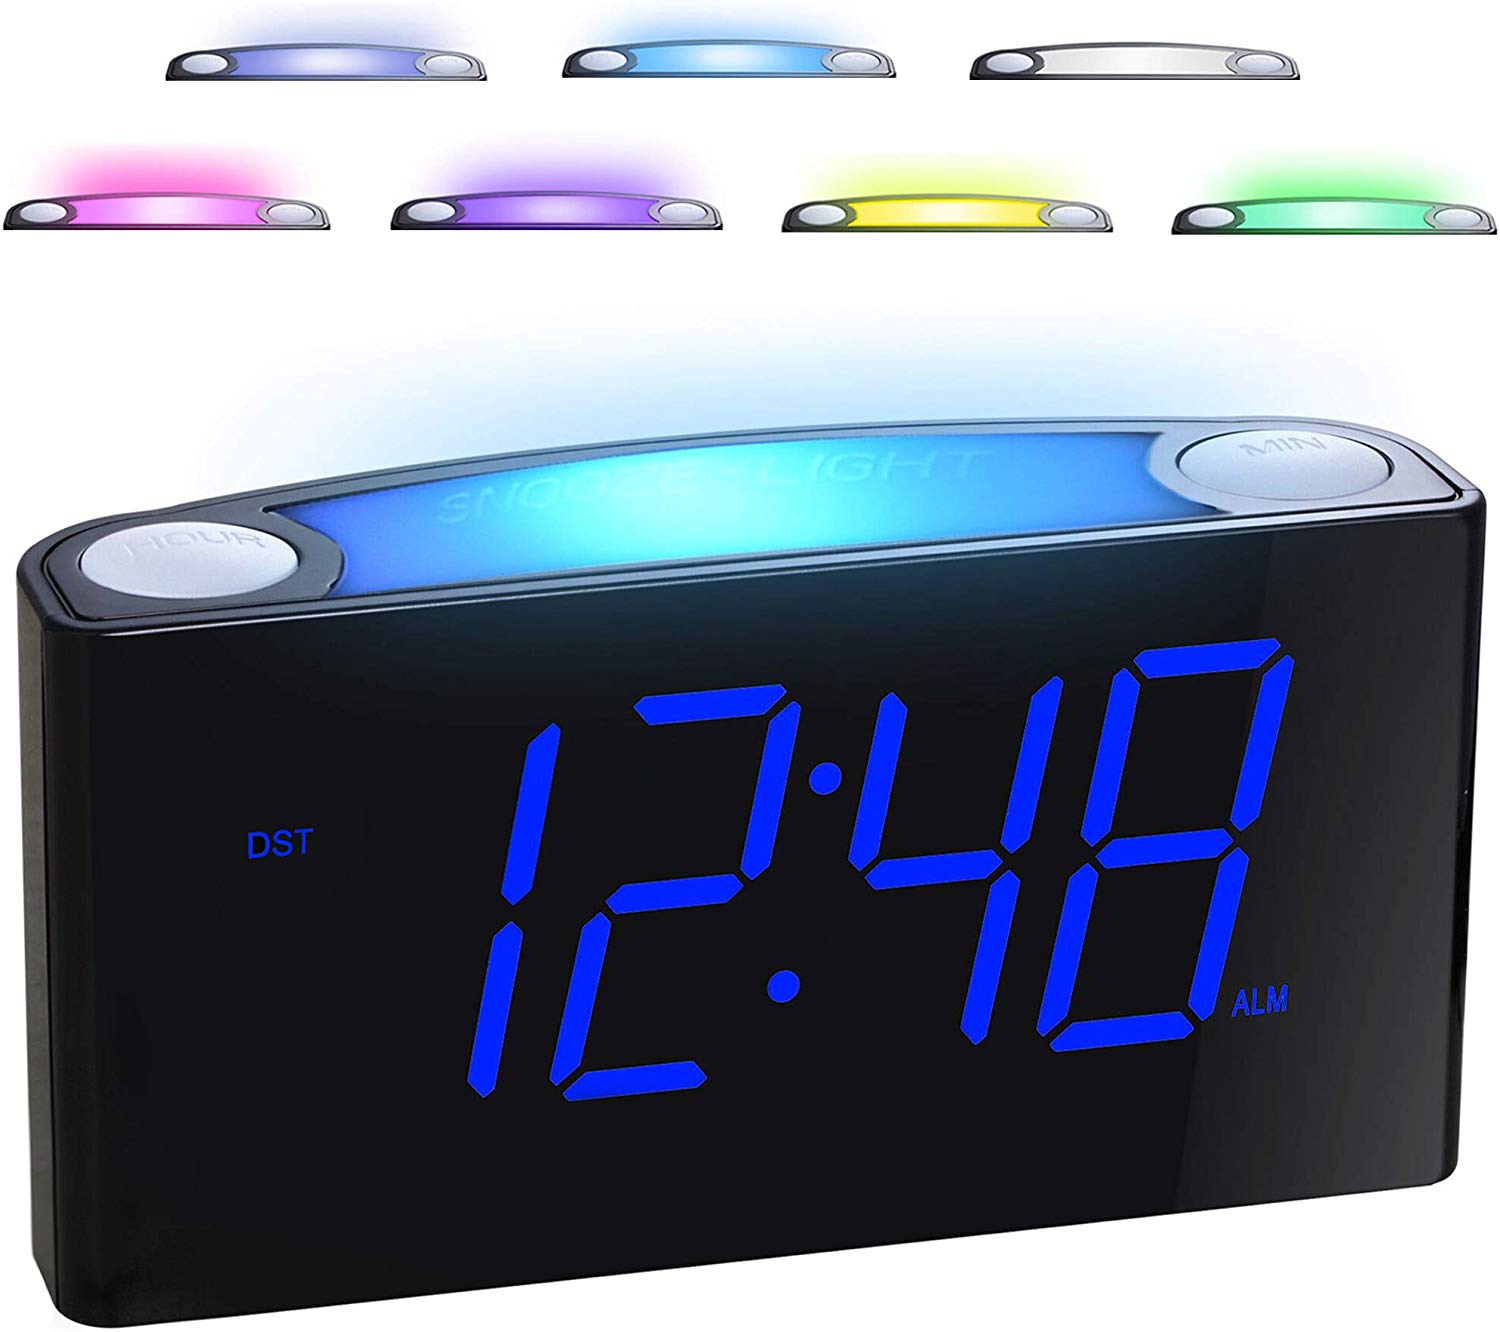 Pros and Cons of Kid’s Alarm Clocks